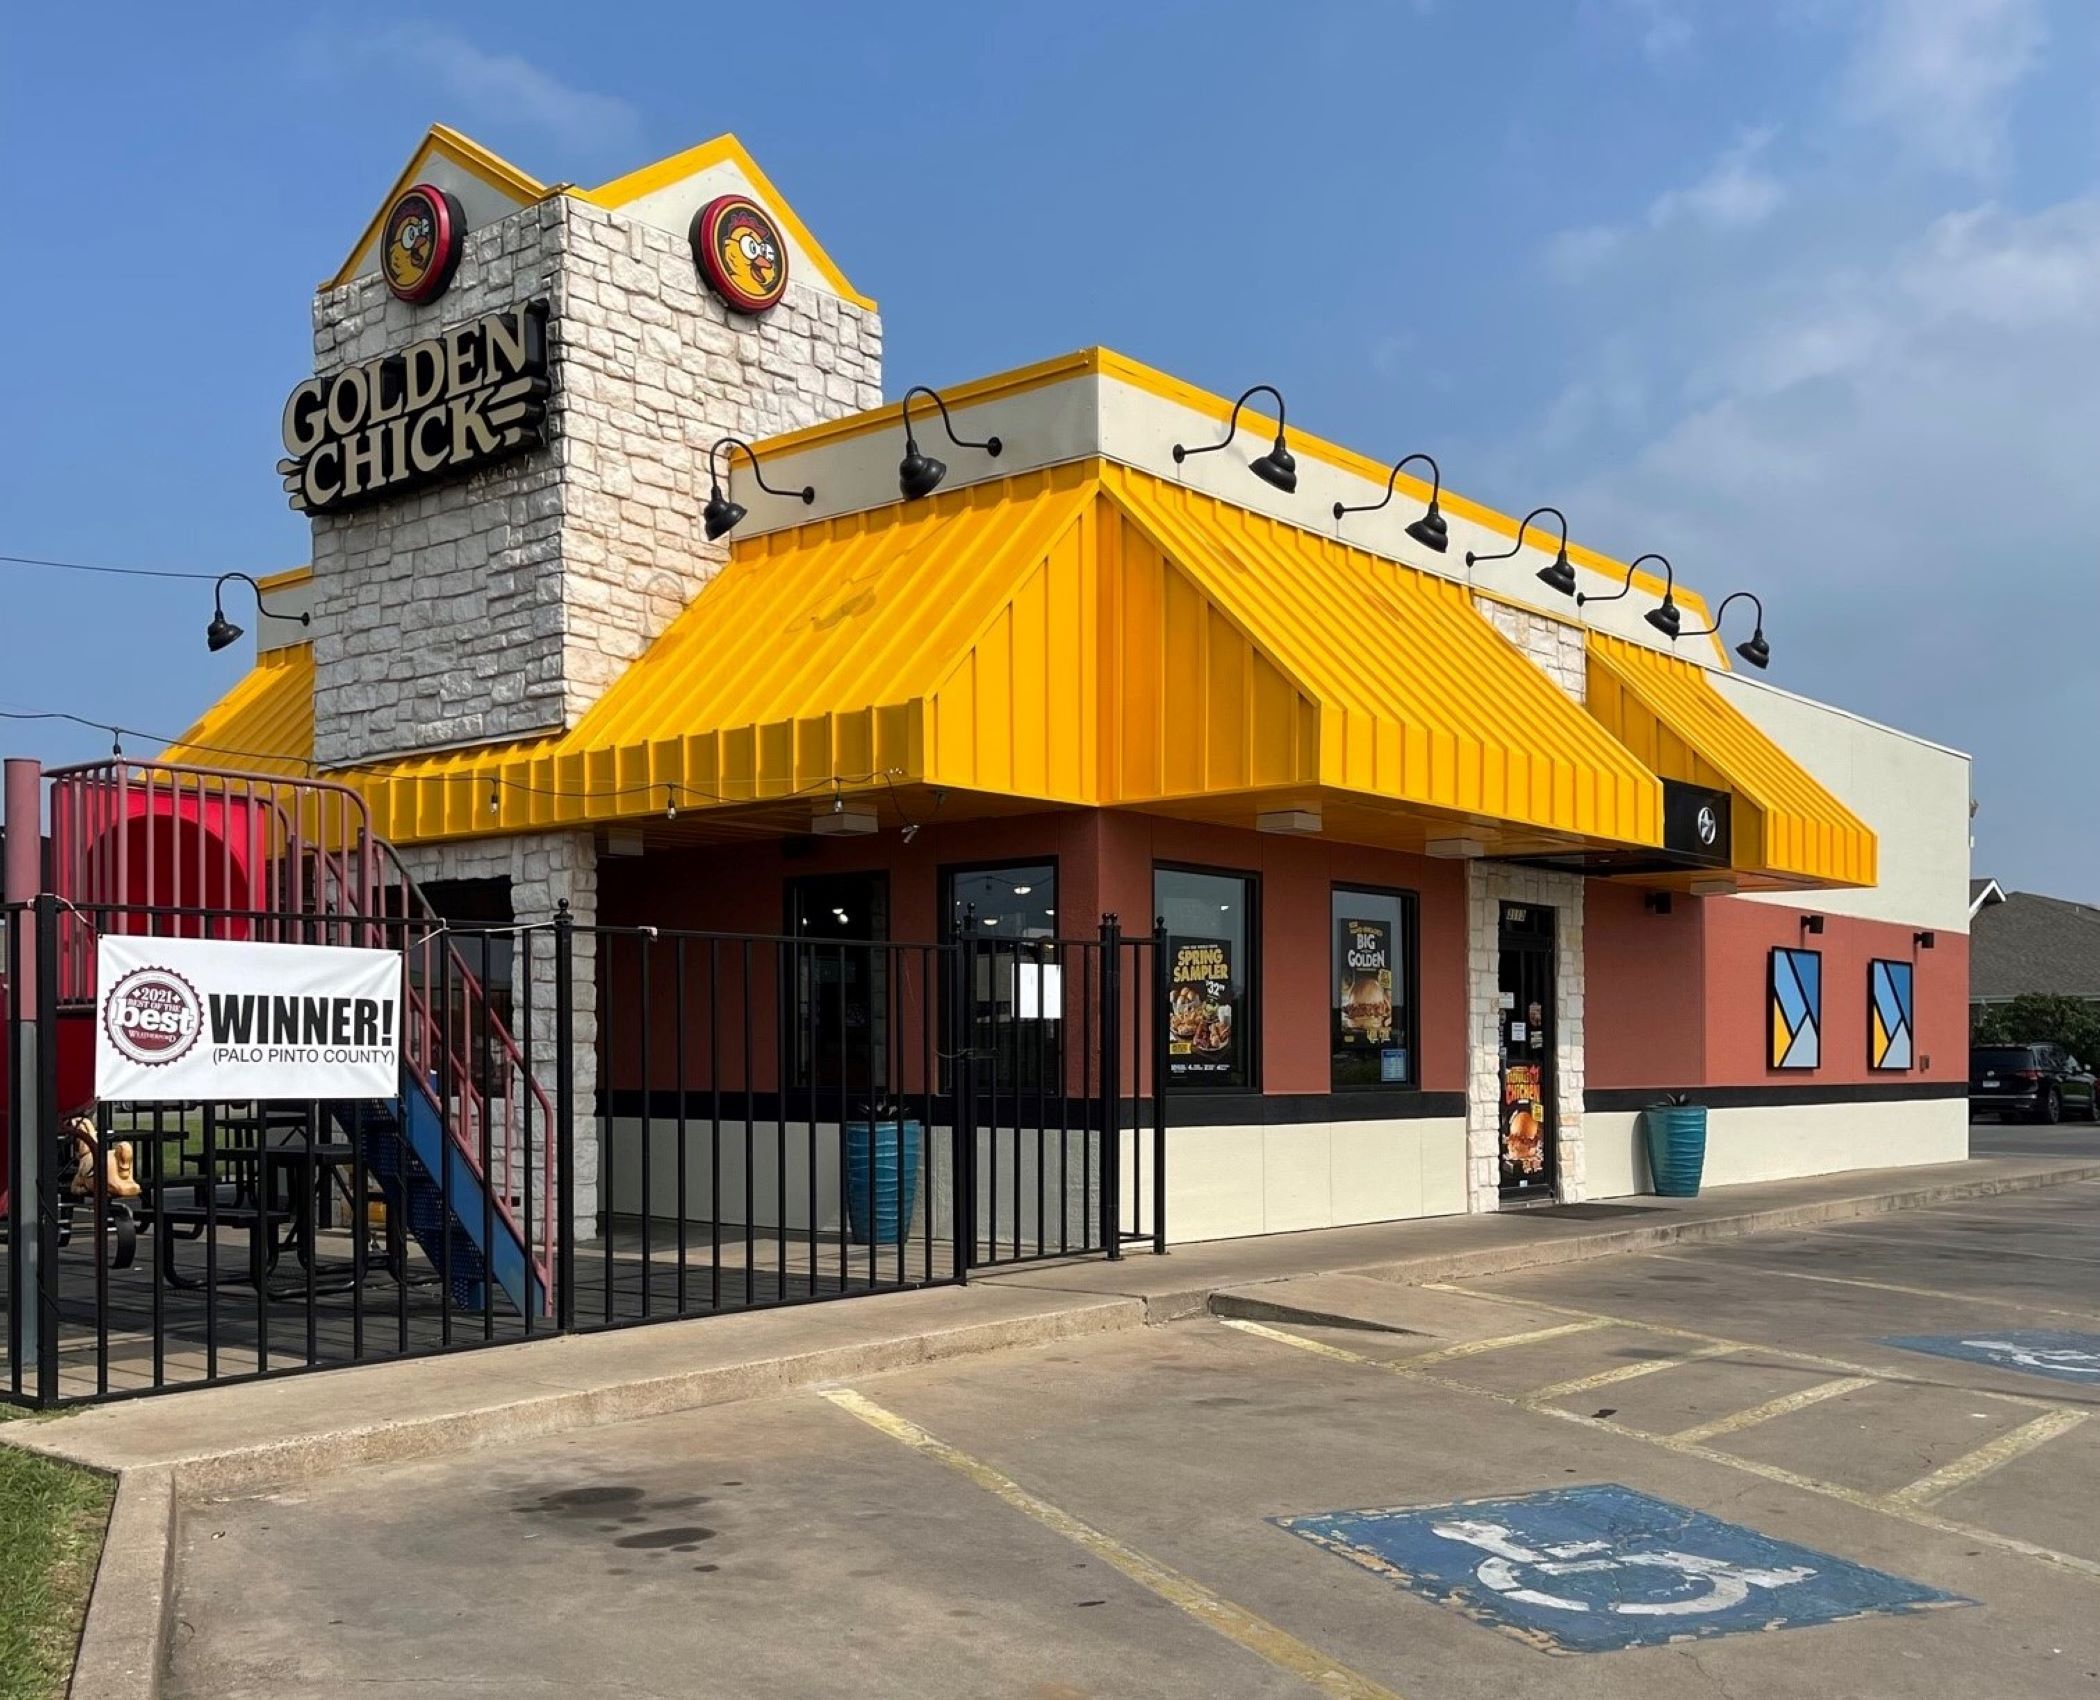 Golden Chick storefront.  Your local Golden Chick fast food restaurant in Mineral Wells, Texas